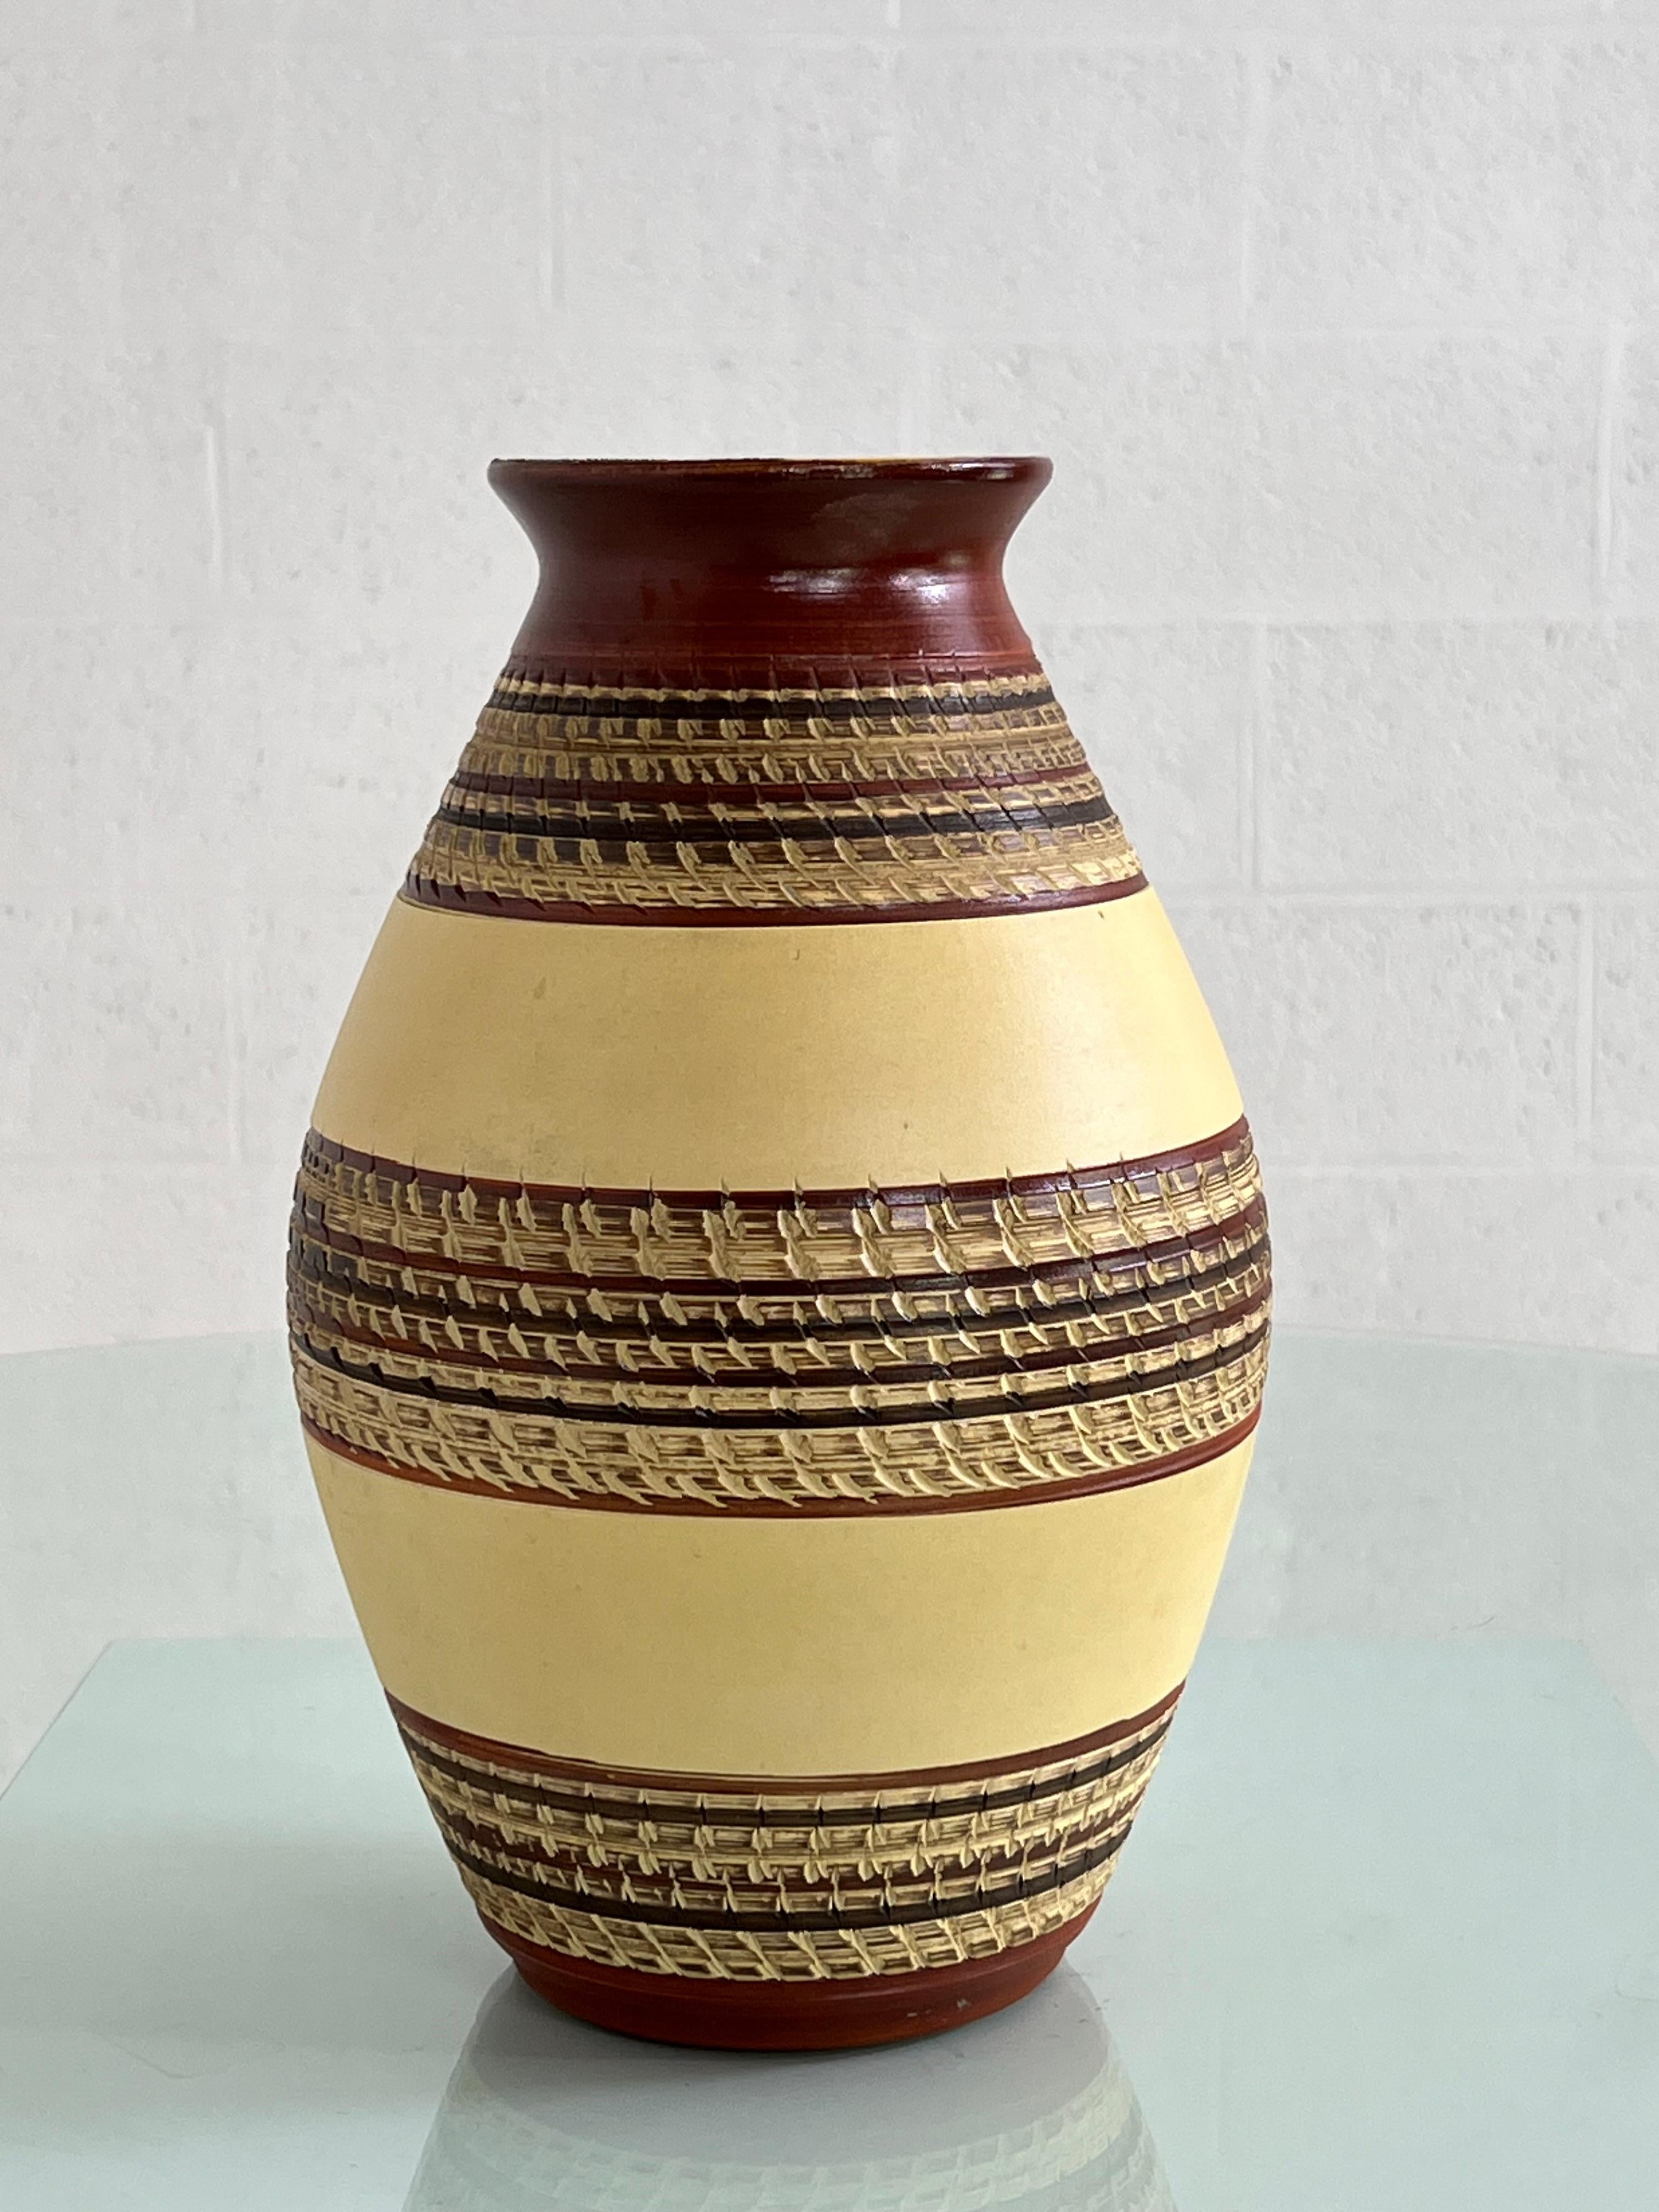 1960s West Germany Handmade Ceramic Vase with beige and brown color outside an beautiful sunny yellow glaze inside